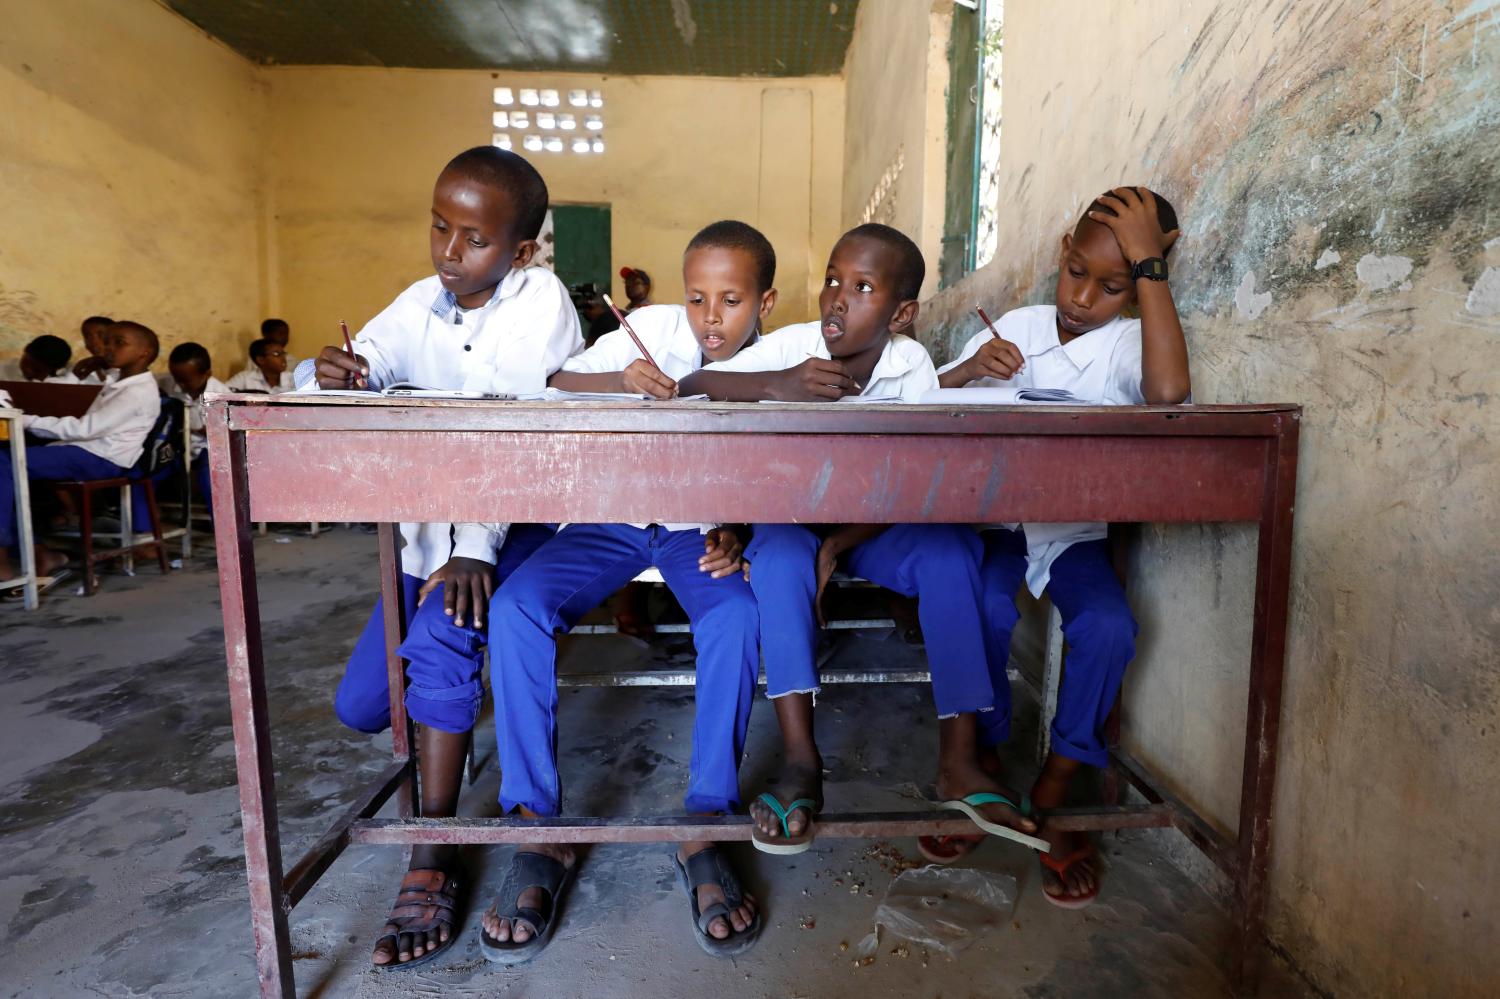 Primary school students attend a class at school that uses a new unified Somali curriculum, at Banadir zone school in Mogadishu, Somalia September 22, 2019. Picture taken September 22, 2019.REUTERS/Feisal Omar